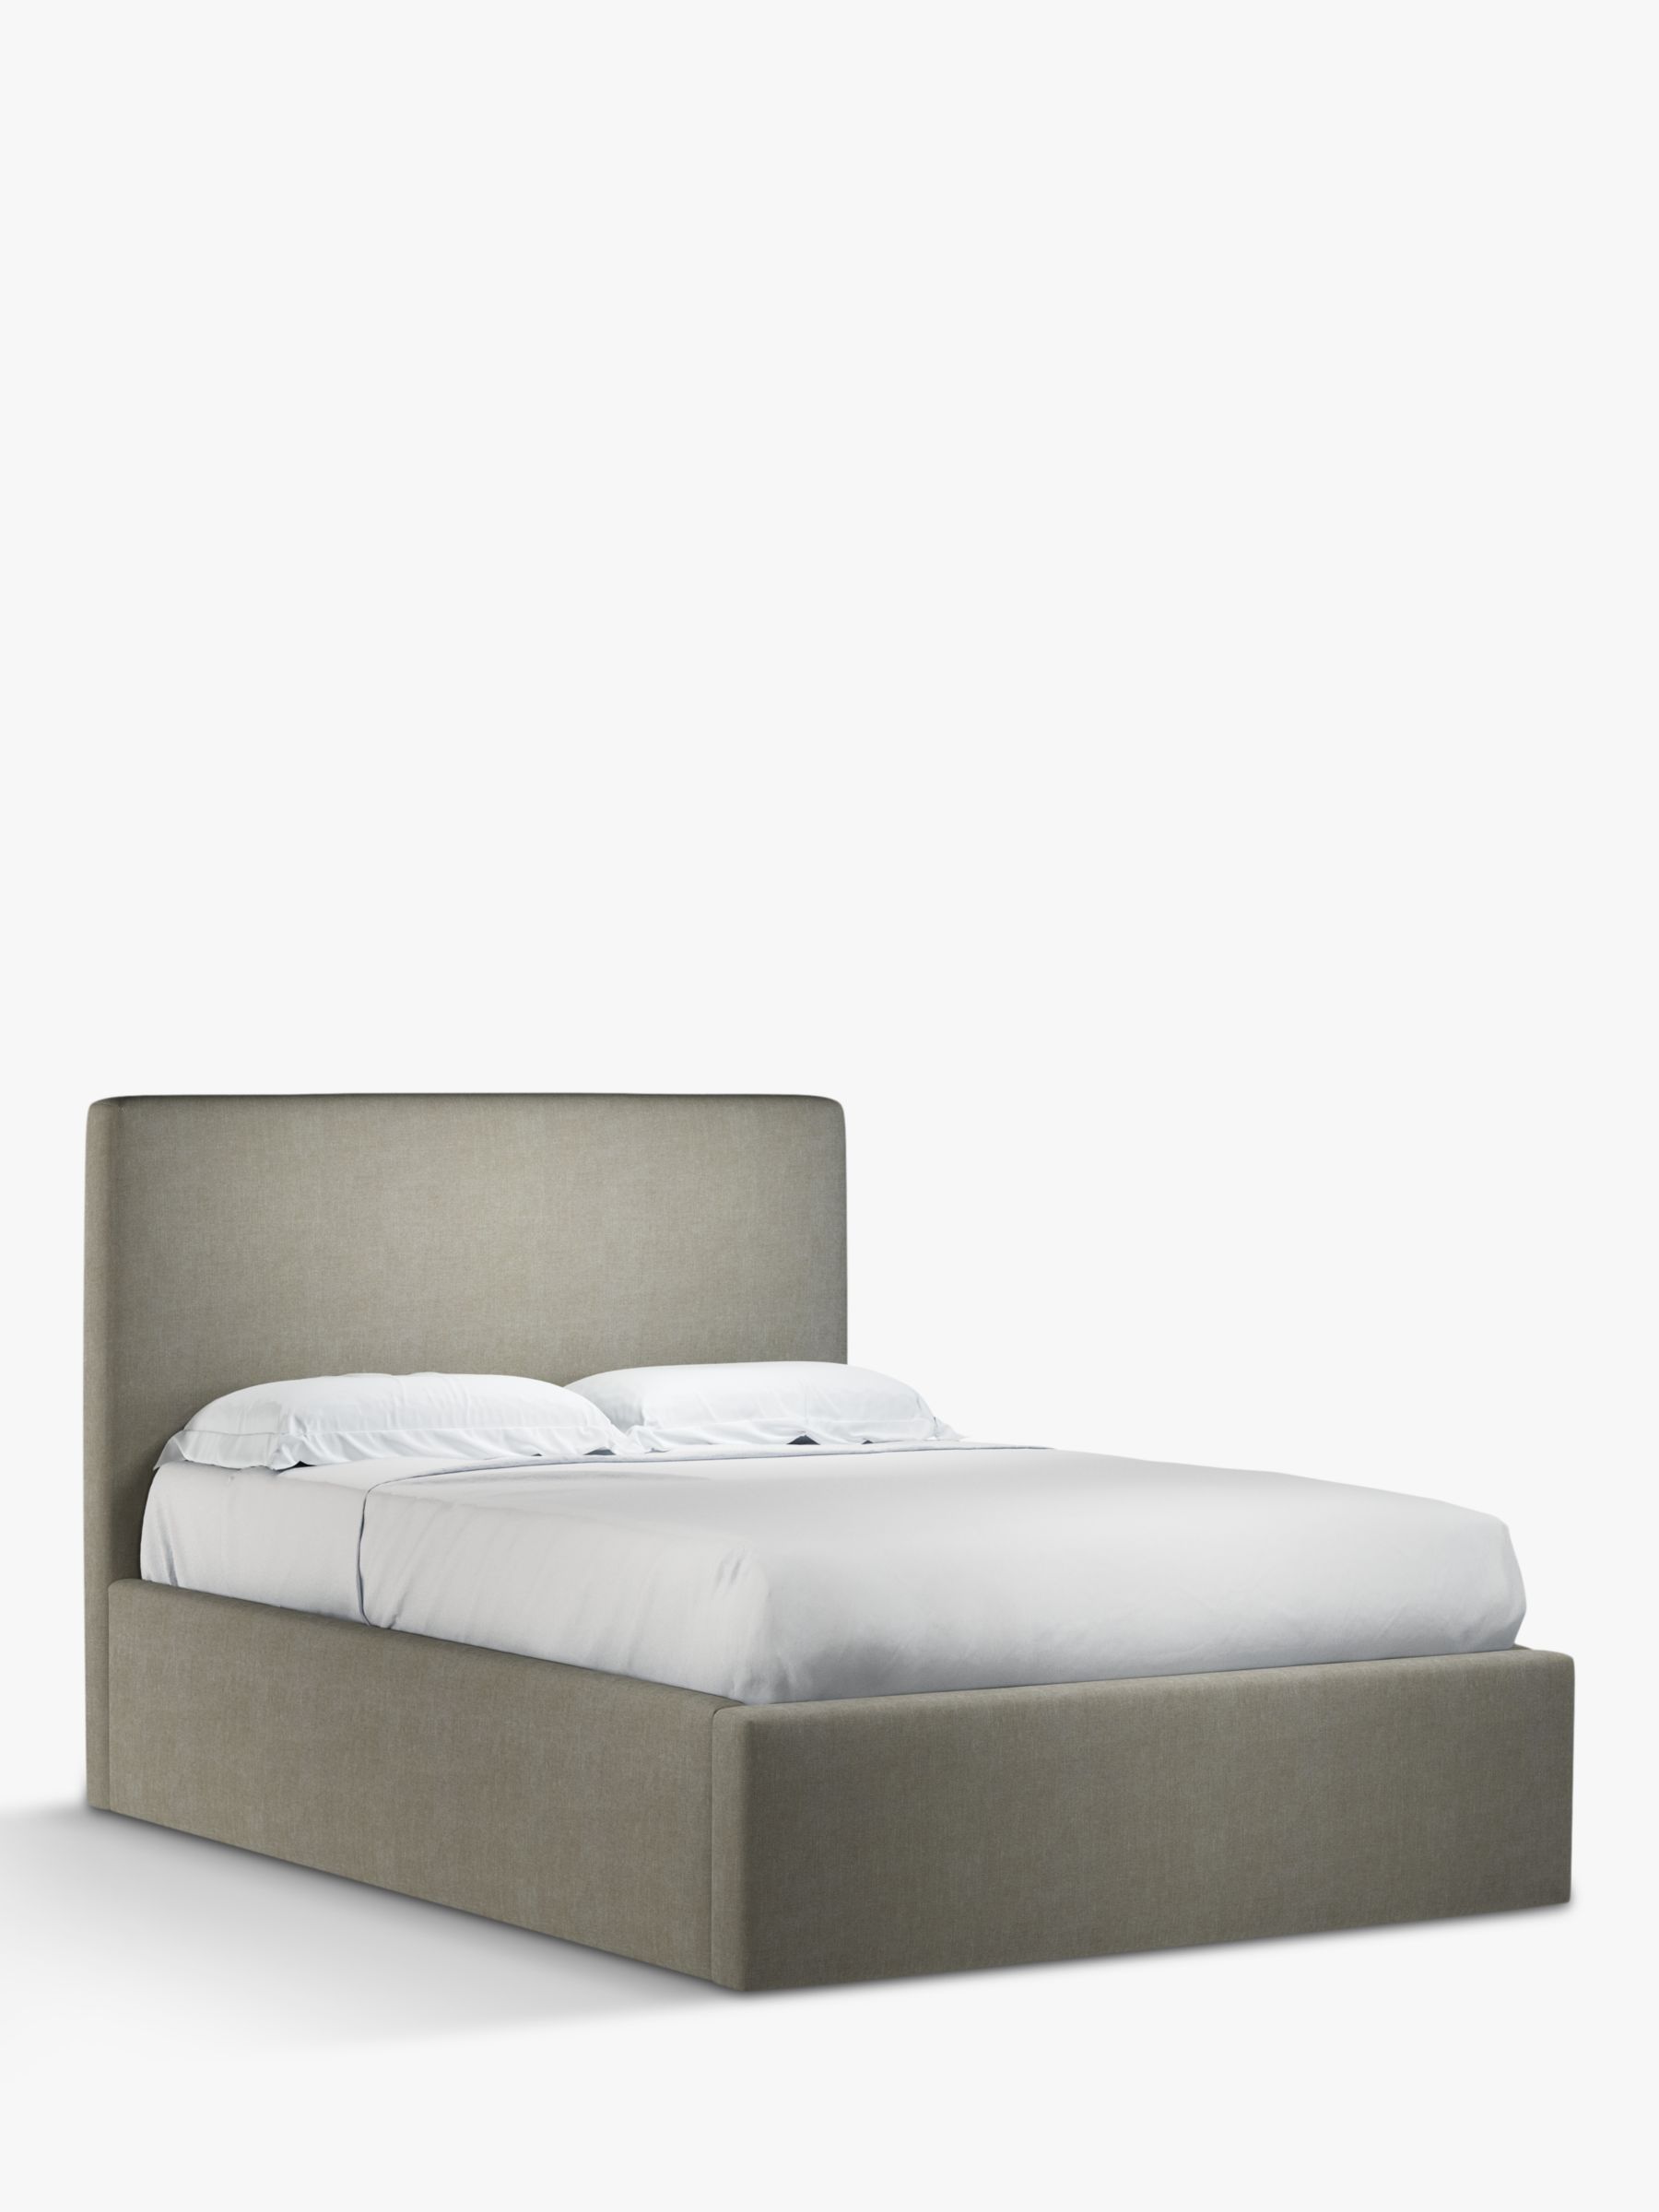 John Lewis & Partners Emily Ottoman Storage Upholstered Bed Frame, Double